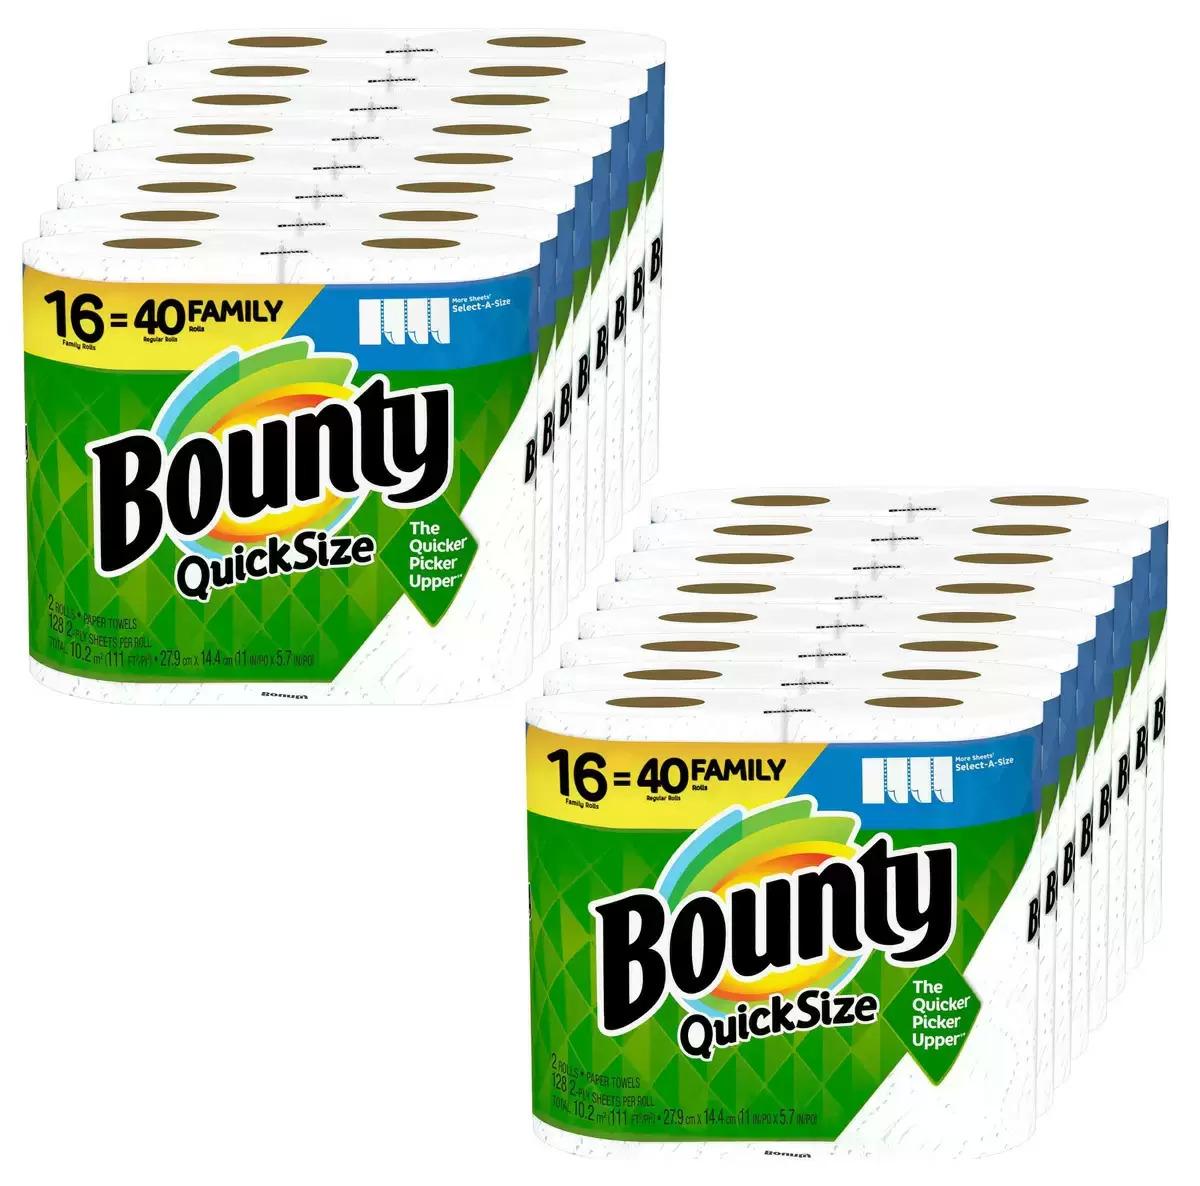 32 Bounty Quick-Size Family Paper Towels with $20 Credit for $79.63 Shipped